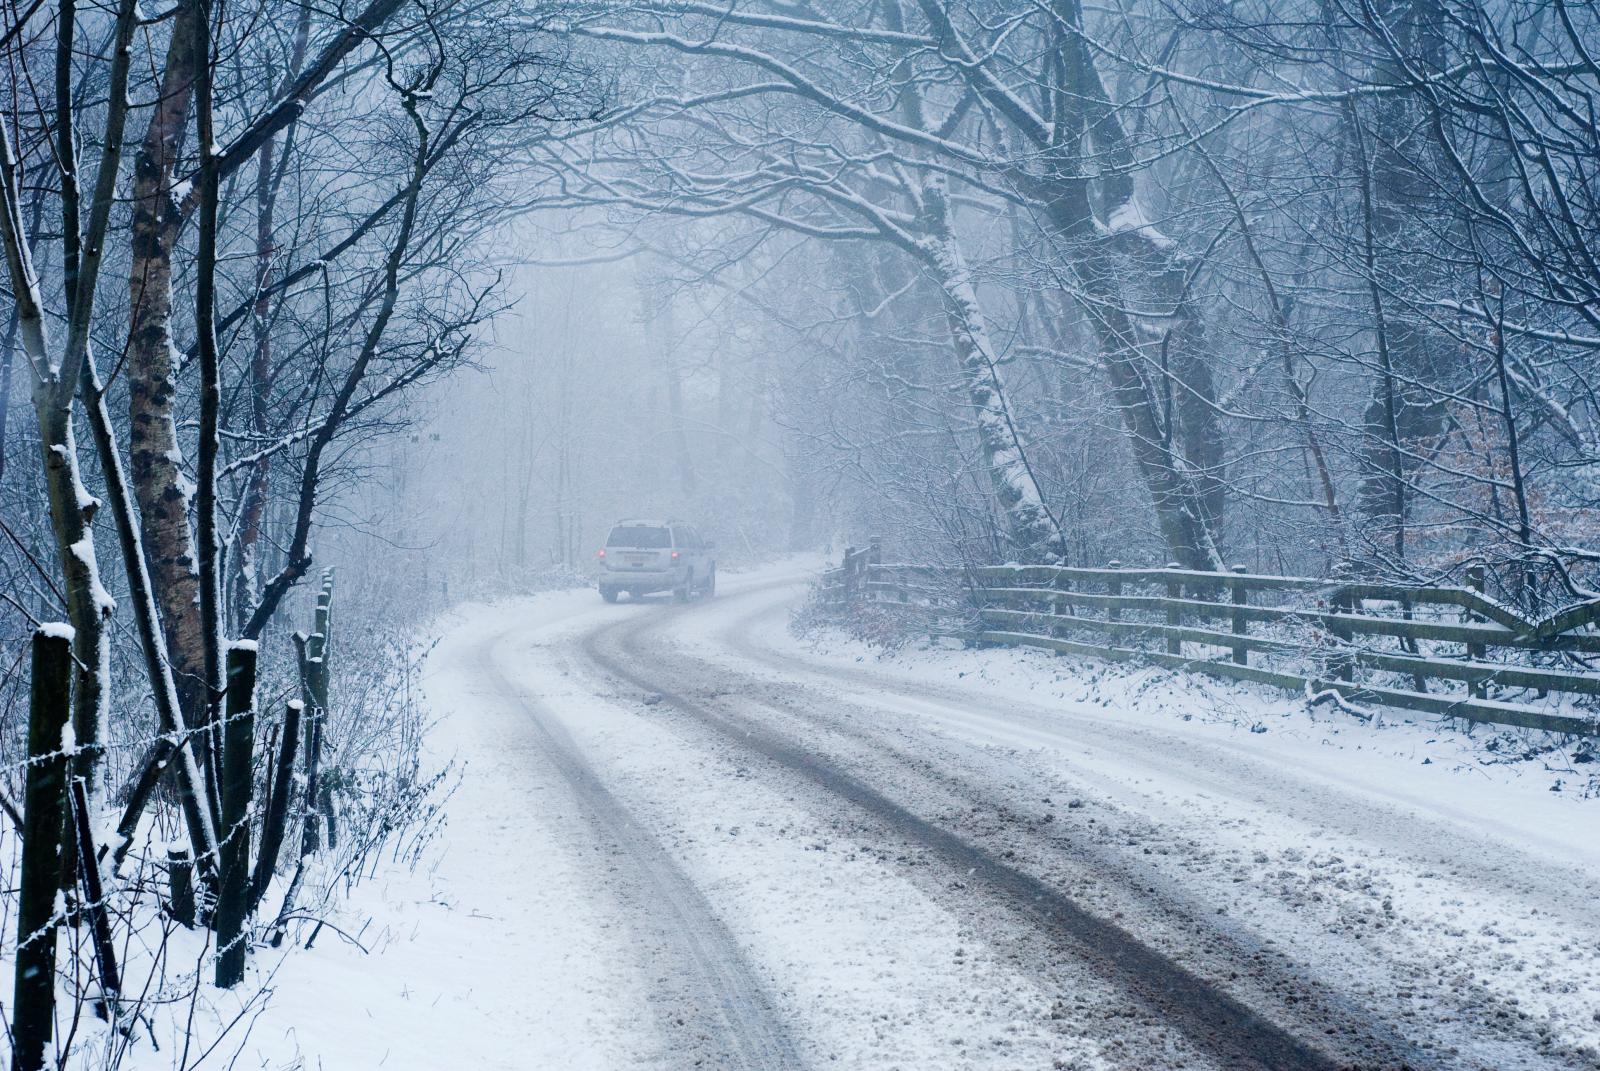 Winter driving advice after the deep snow in the Lake District